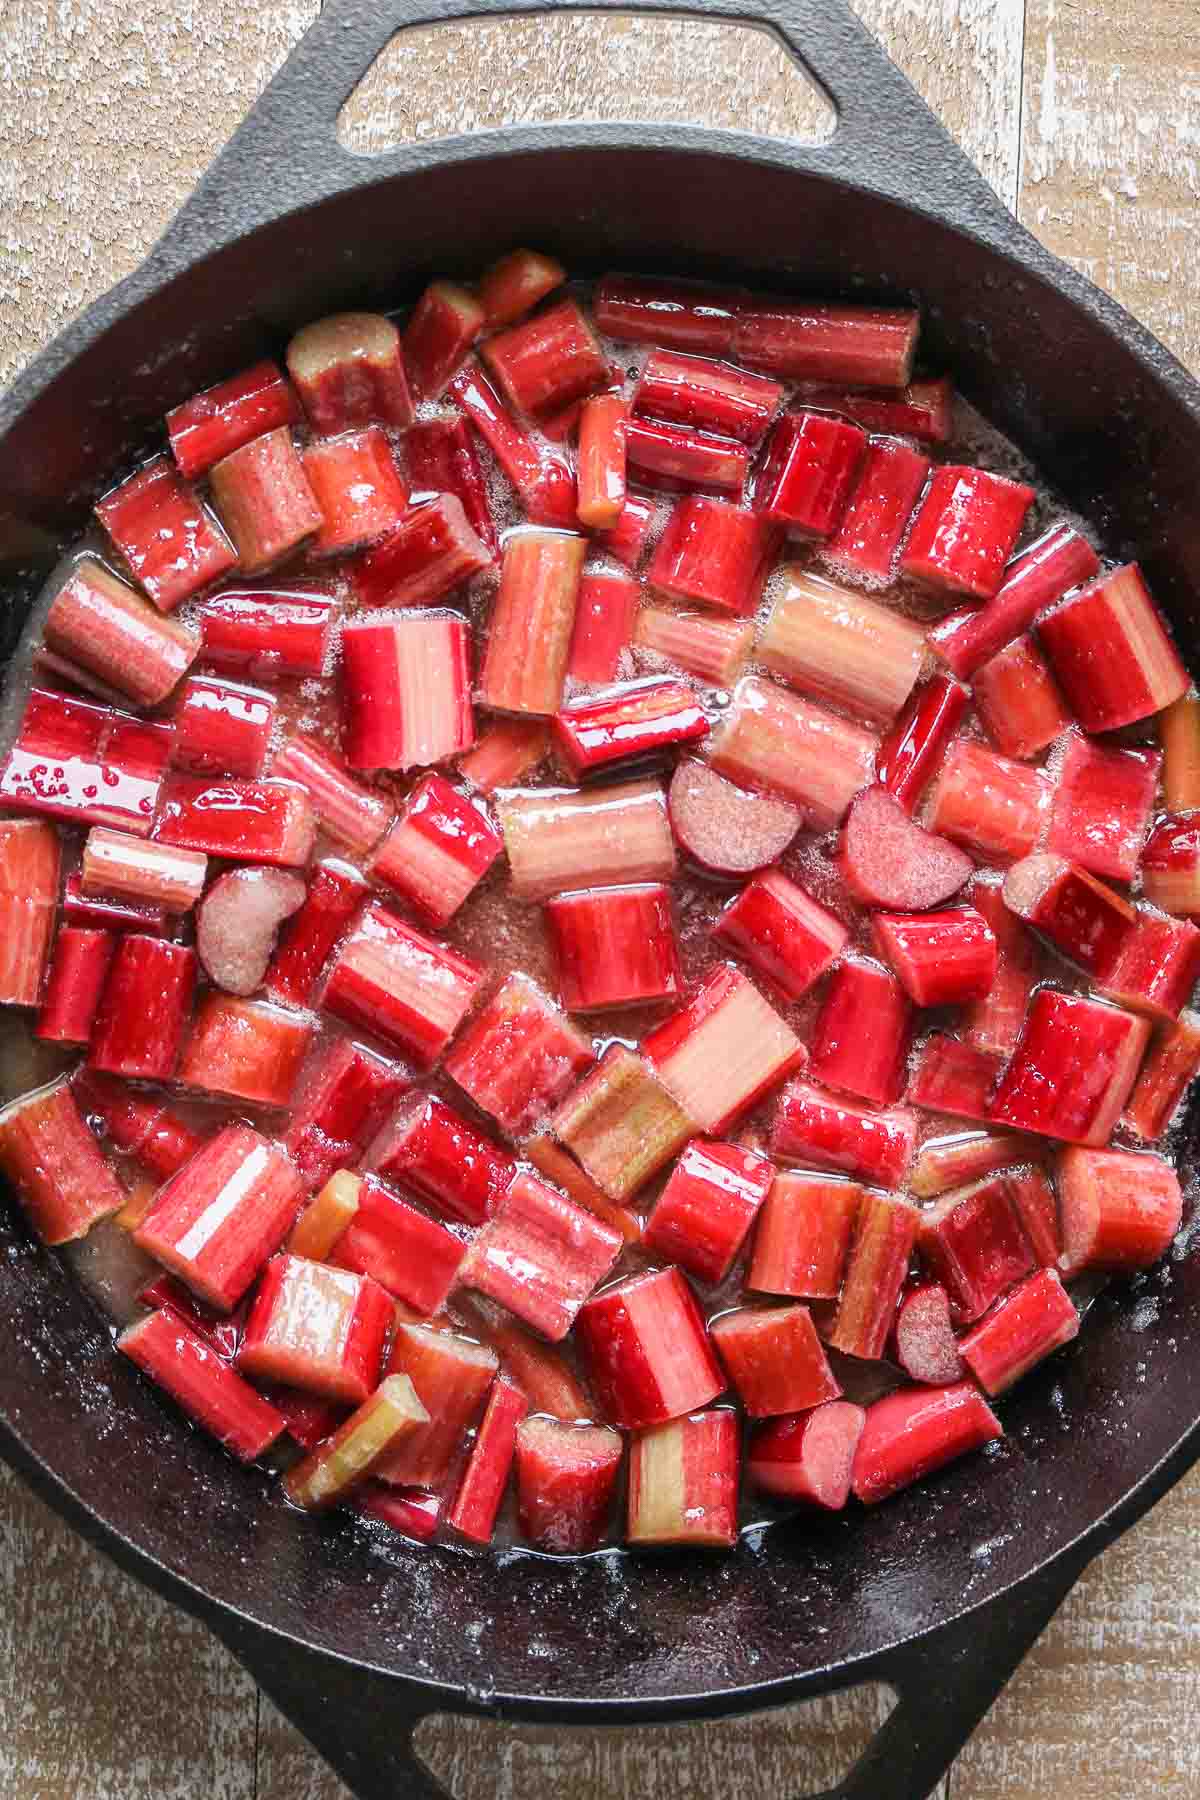 Chunks of rhubarb being coated in a sugar mixture in a cast-iron-skillet.